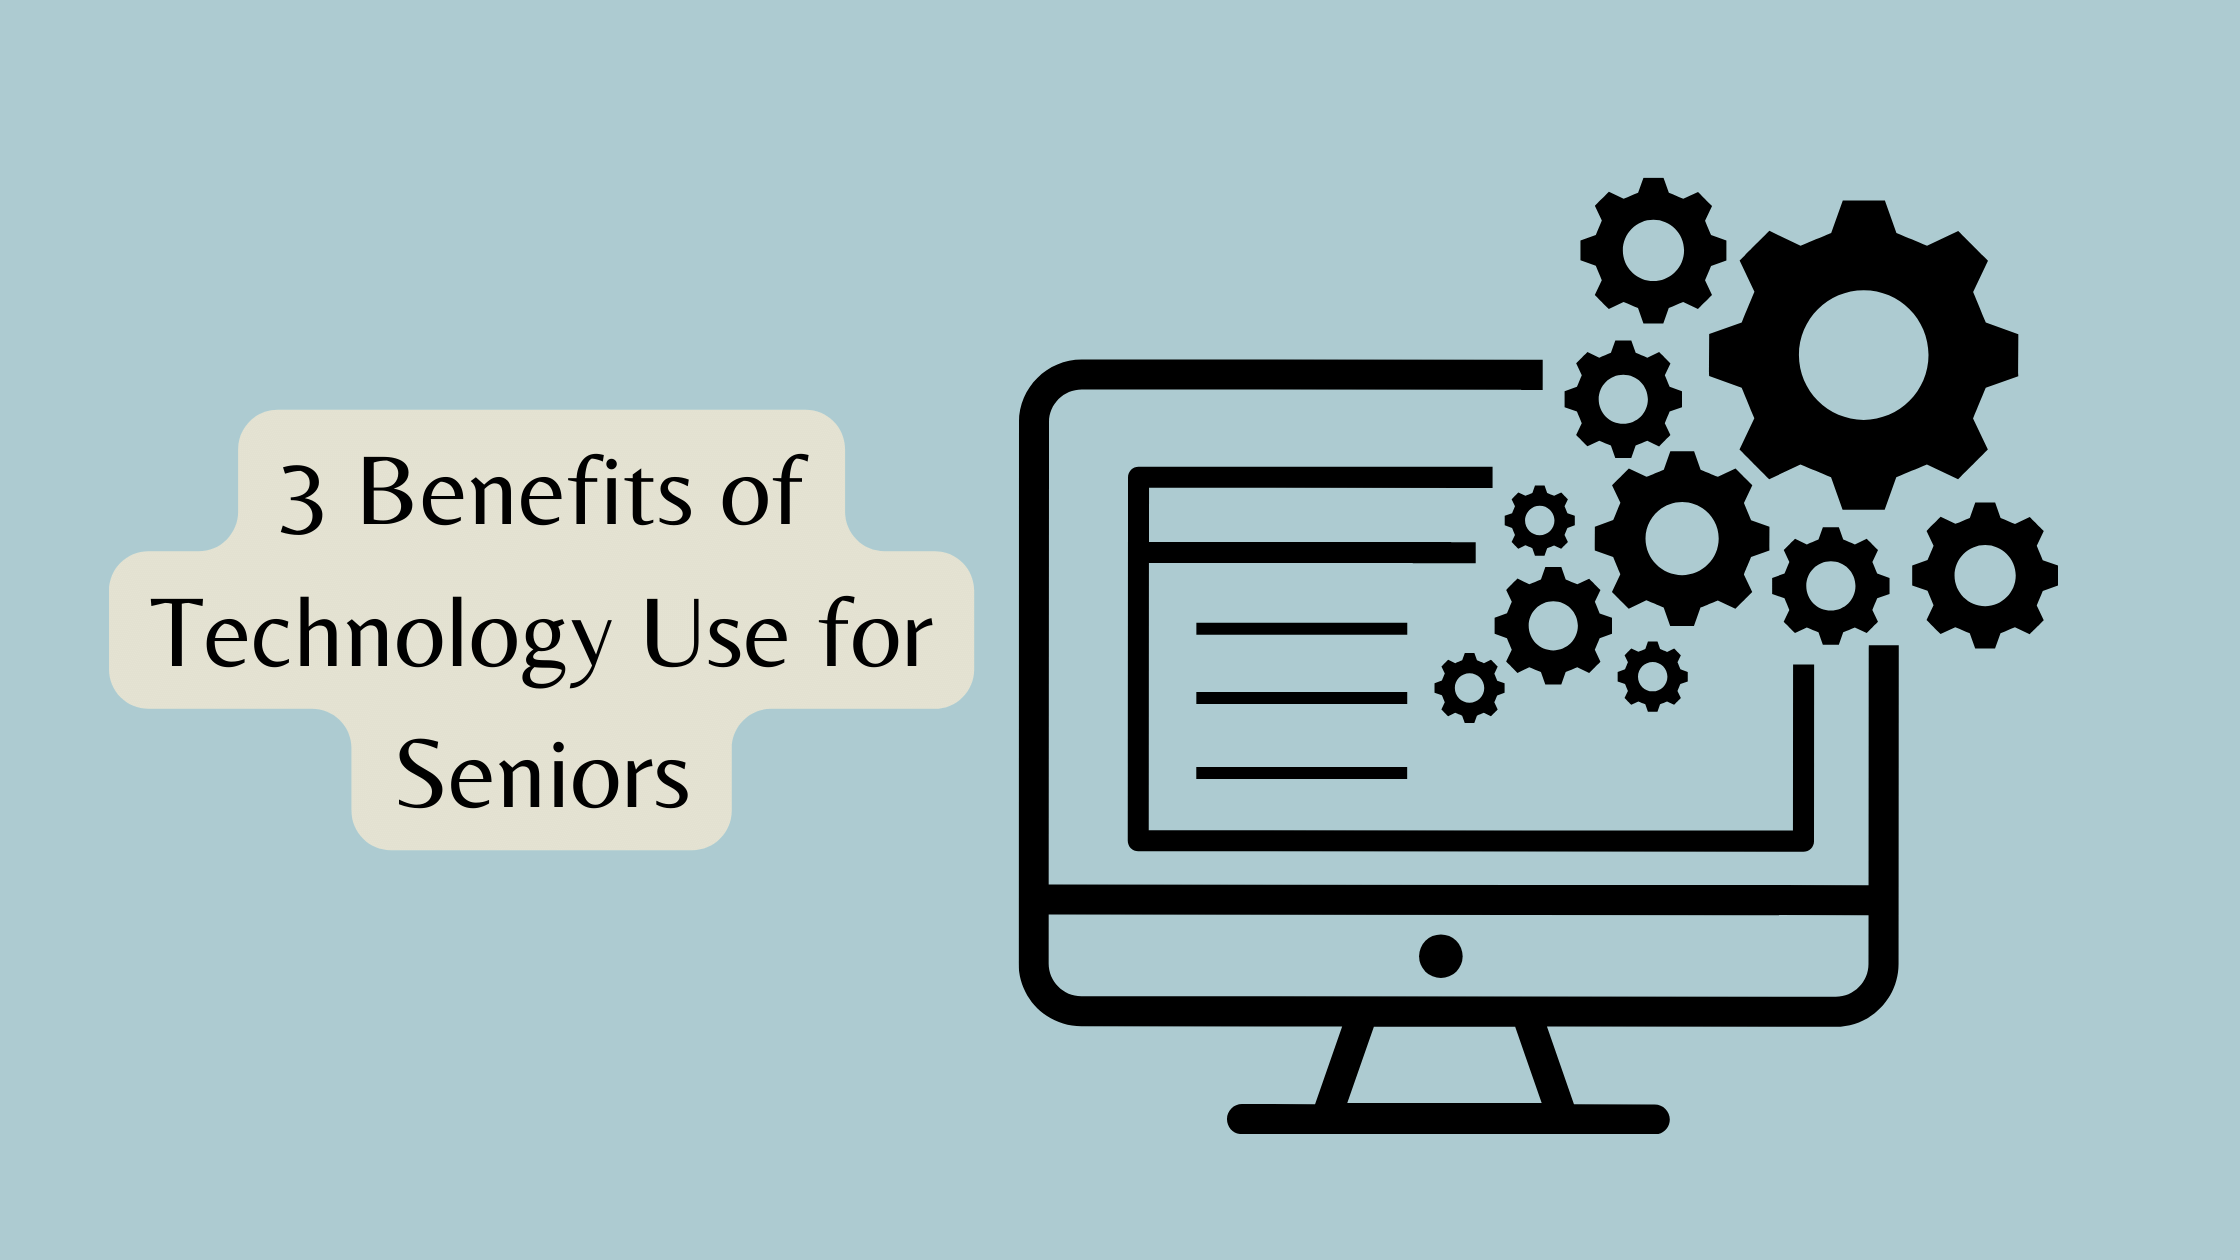 Benefits of Technology Use for Seniors